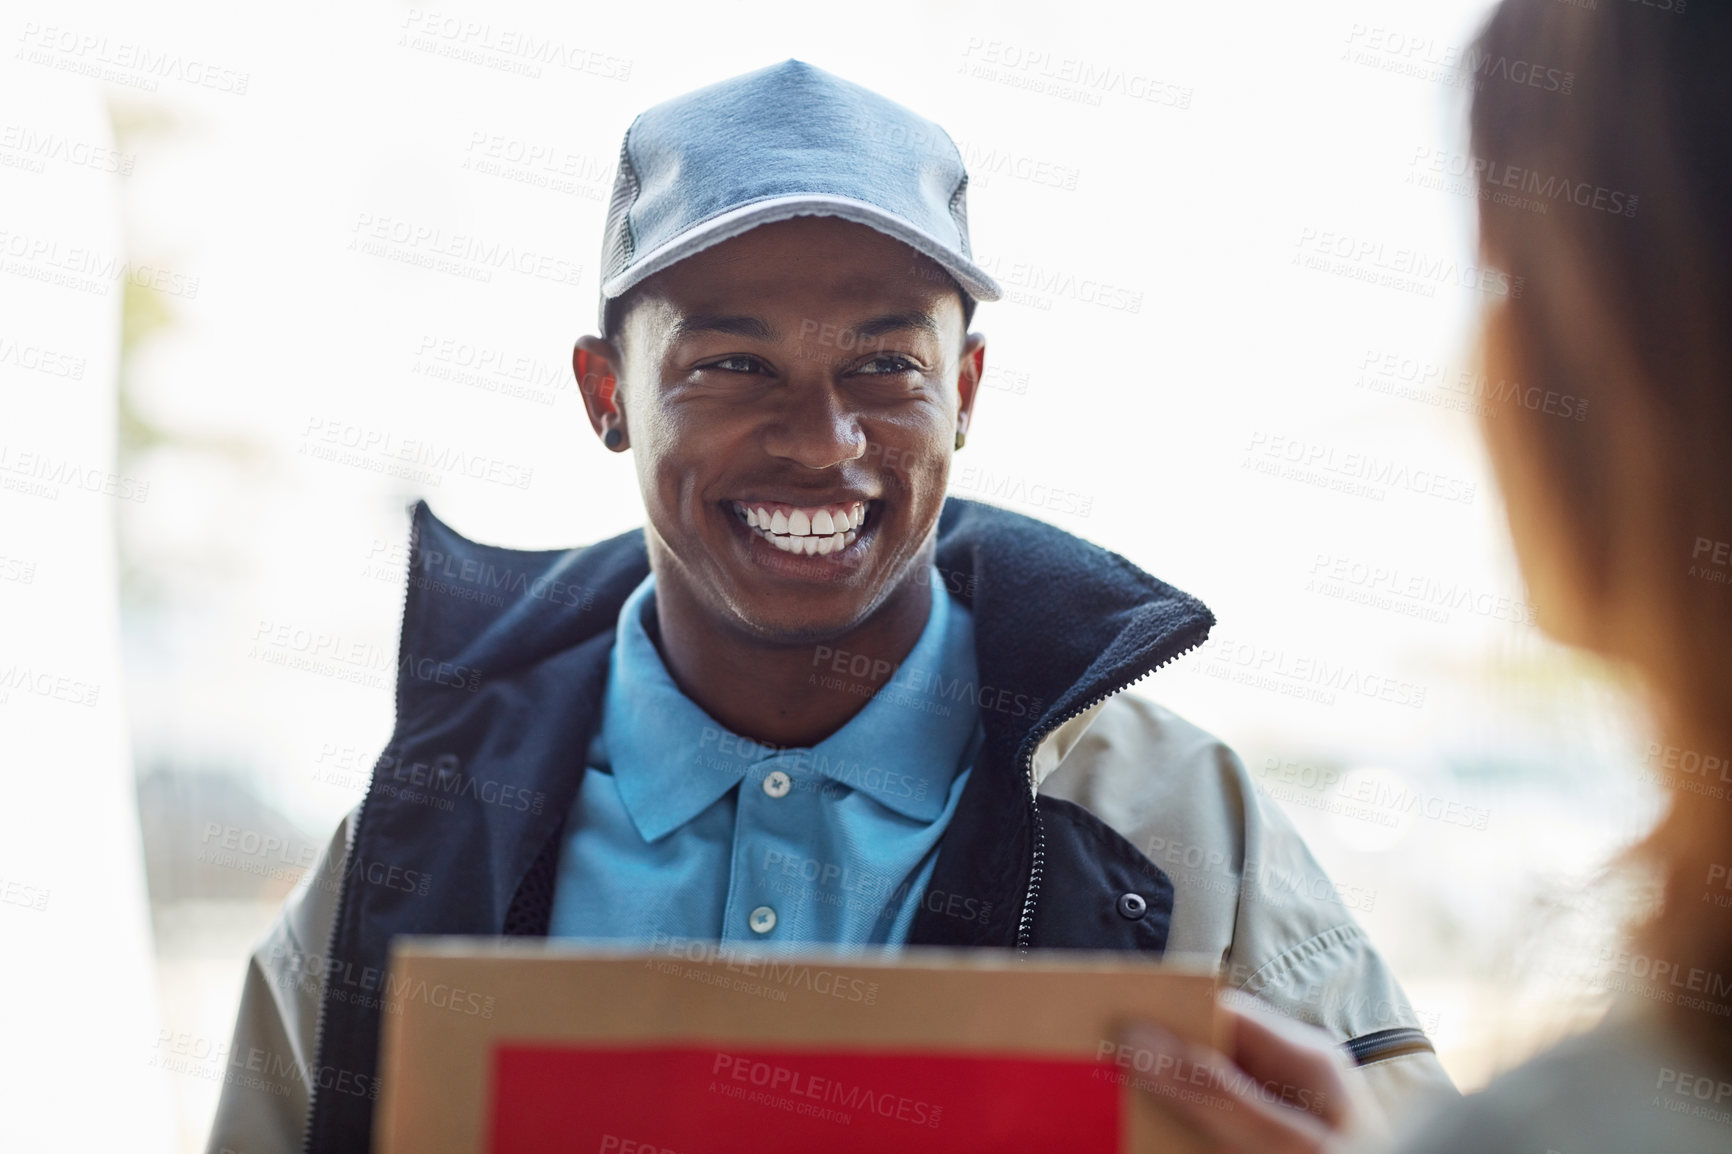 Buy stock photo Cropped shot of a courier making a delivery to a customer